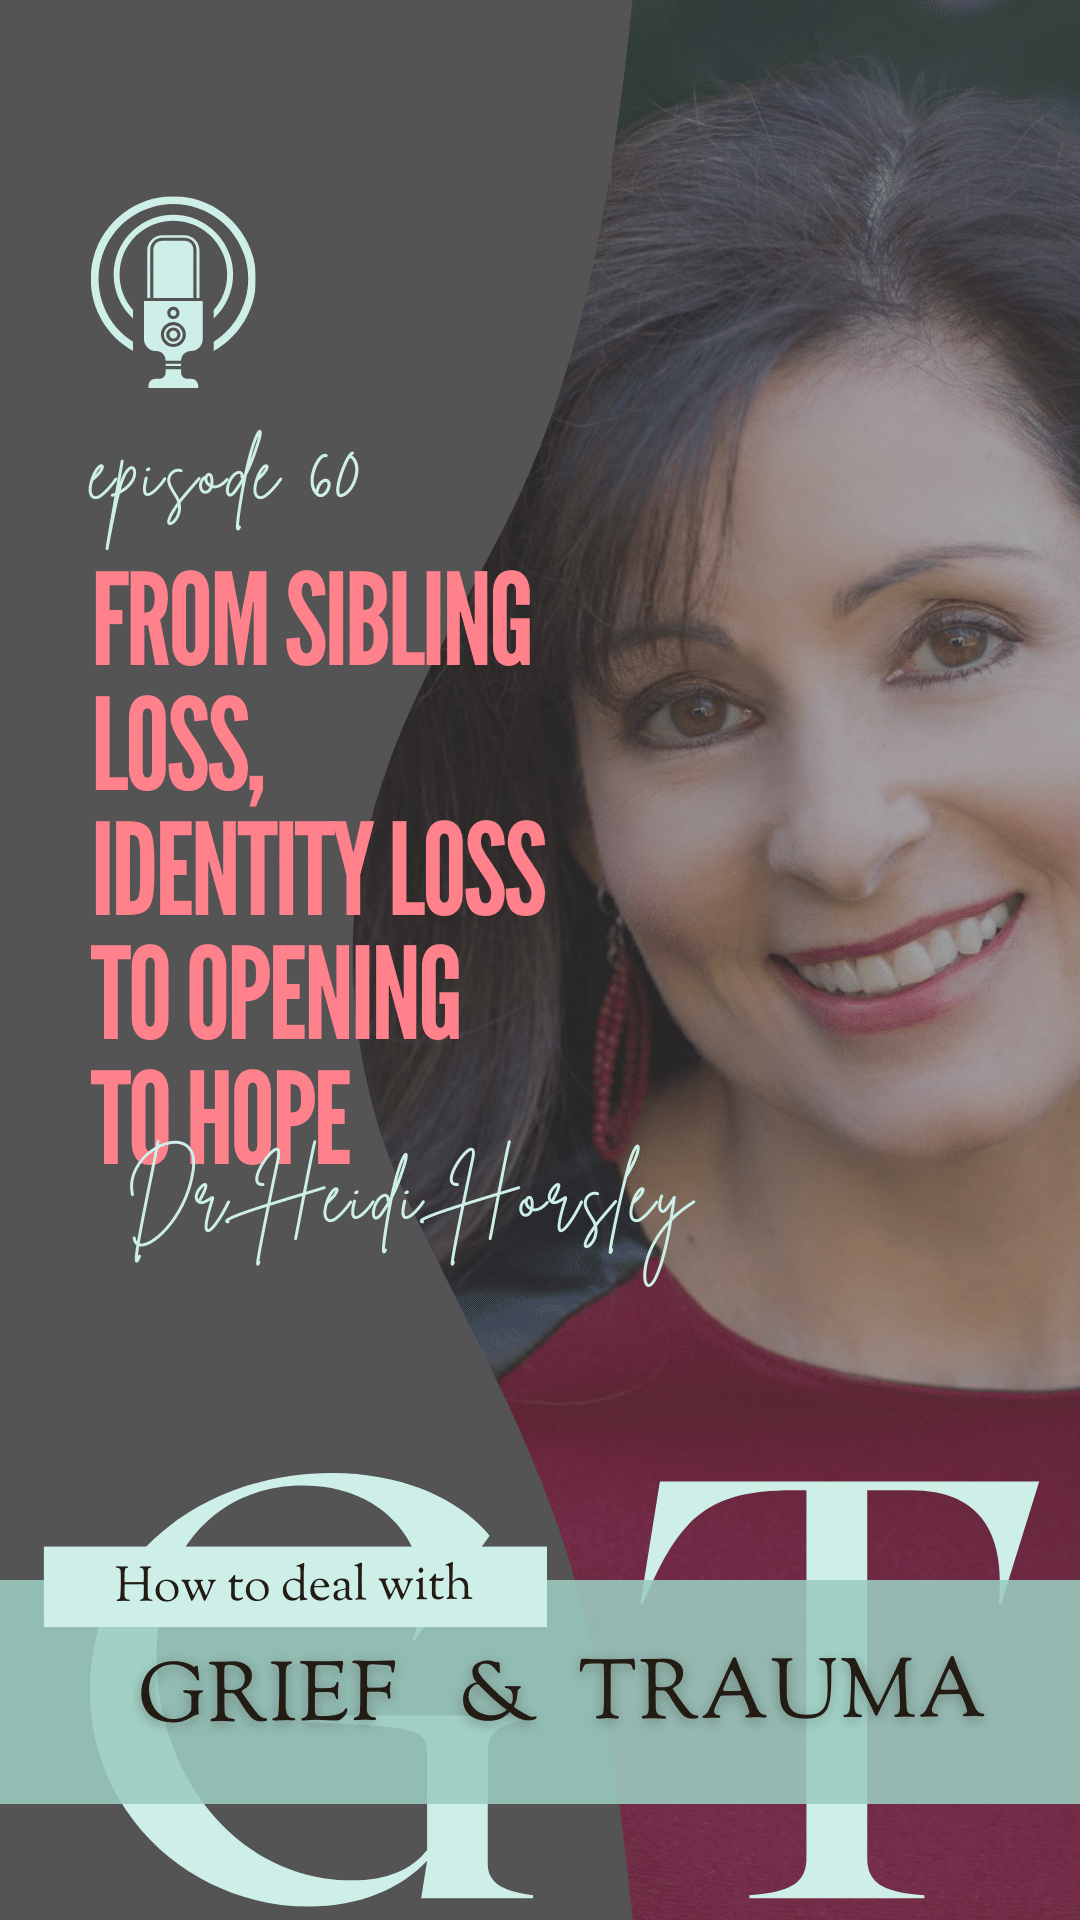 60 Heidi Horsley From Sibling Loss, Identity Loss to Opening to Hope